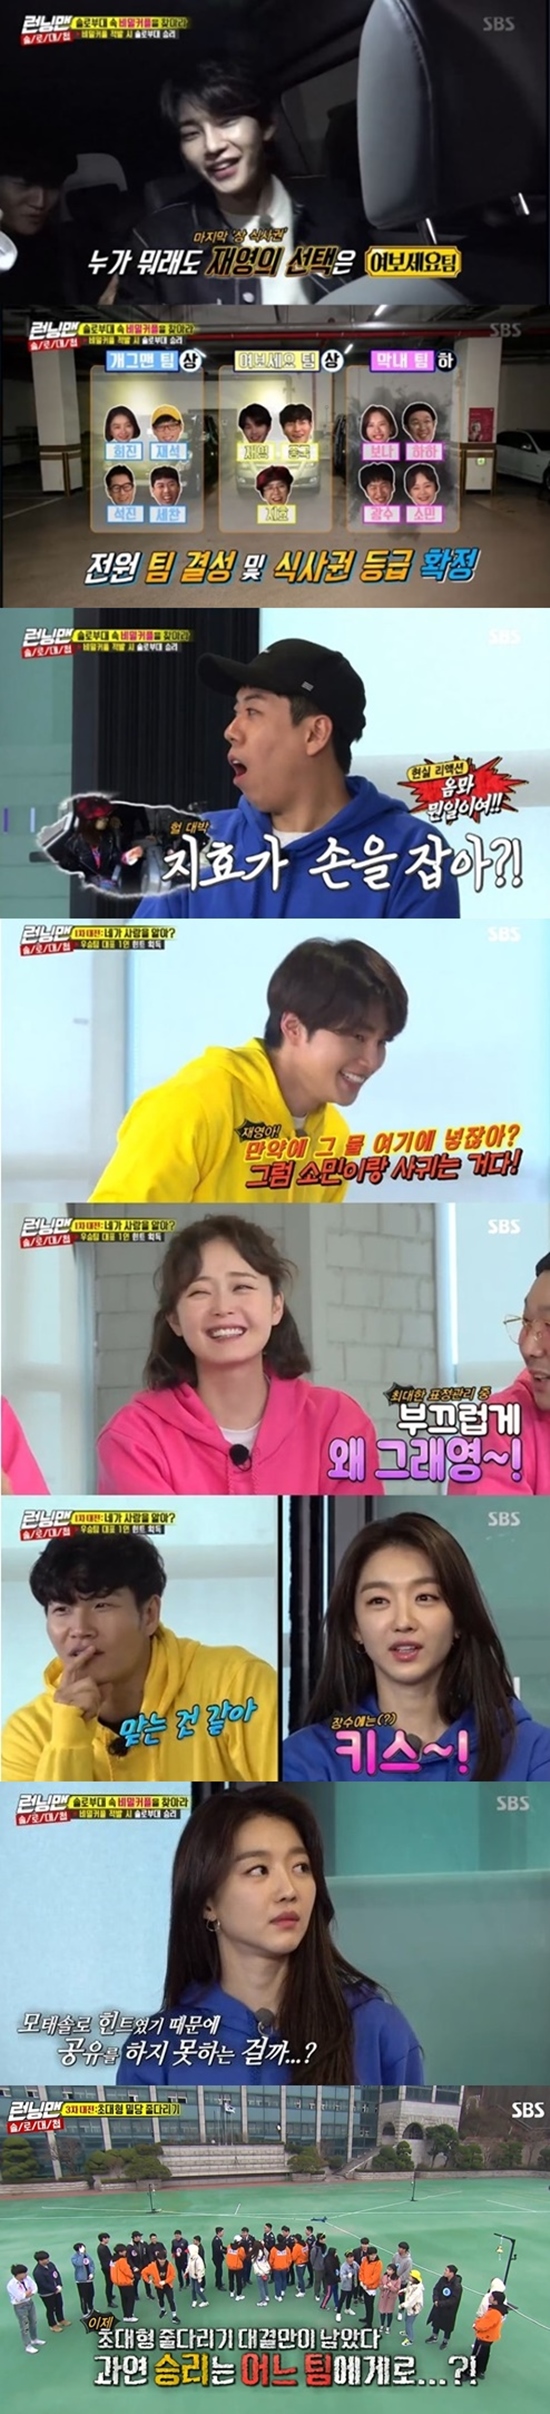 Running Man received the attention of viewers foreshadowing the tug of war.On this day, the broadcast was decorated with the Solo Countermeasures race to find a secret couple in the Solo Unit, and actors Jang Hee-jin, Jae-young Kim, and space girl Bonaga joined as guests.The members and guests were divided into three teams and made secret couples through a round-by-round mission.The members made a fierce check and notice from the formation process of the team.In particular, Jeon So-min blocked Choices itself, saying to Jang Hee-jin, who had Choices his team, It is a place for Jae-young Kim.Eventually, Jang Hee-jin formed a gagman team with Yoo Jae-Suk, Ji Suk-jin and Yang Se-chan.Kim Jong-kook said, Song Ji-hyo is not interested in the original guest, but suddenly Jae Young took his hand today.Song Ji-hyo refuted, I am a secret couple or Kim Jong-kook is jealous of me. He raised his curiosity about the identity of a real secret couple.Jang Hee-jin was suspected of being another secret couple candidate because he received a mossalhint as a representative in World War I but did not share it with members.Among them, he played a big role in World War IIs Campus Battle Ground; Jang Hee-jin surprised everyone with the relay correct answer at the level of an open air translator.Three World Wars was predicted to be a trunk tug of war, which recruits students for each team and plays a confrontation.The comedian team was in military department, the Hello team was in model, the youngest team was in collaboration with musicals and students, and the scene was the highest audience rating of 8.6% per minute.It will be revealed on the air which team will win the tug of war.Running Man is broadcast every Sunday at 5 p.m.Photo = SBS Broadcasting Screen